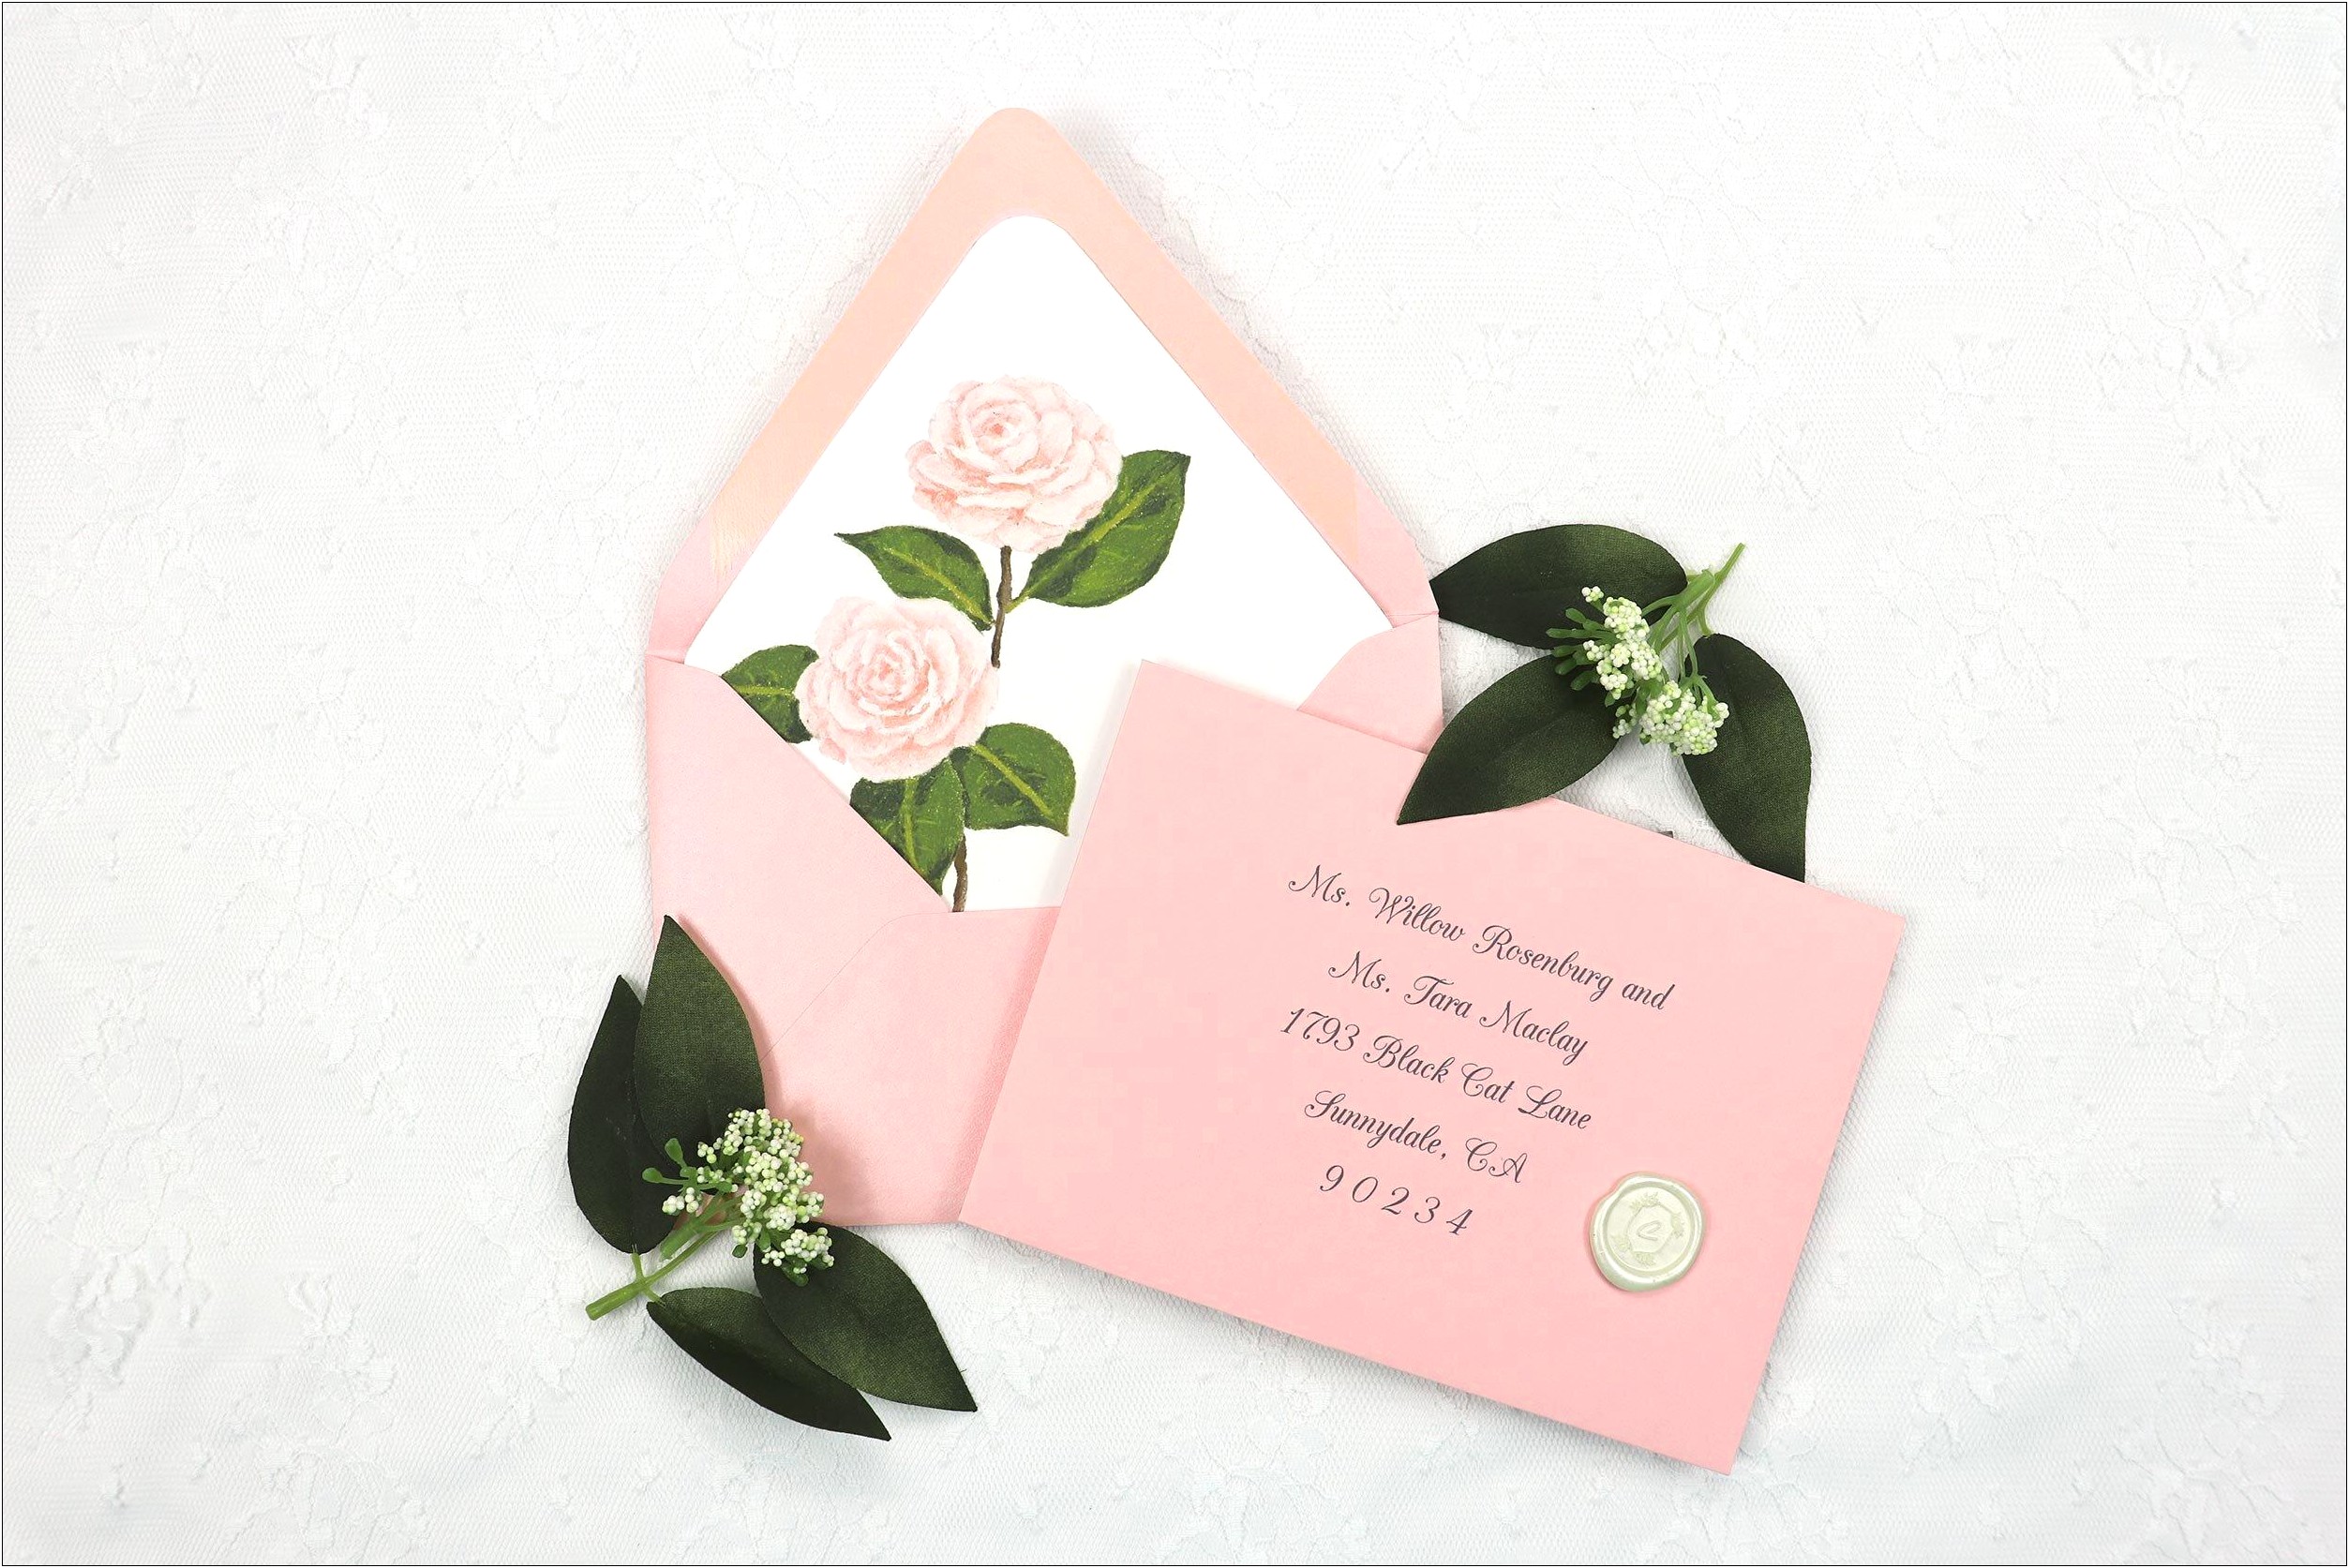 Addressing Wedding Invitations To Dating Couples